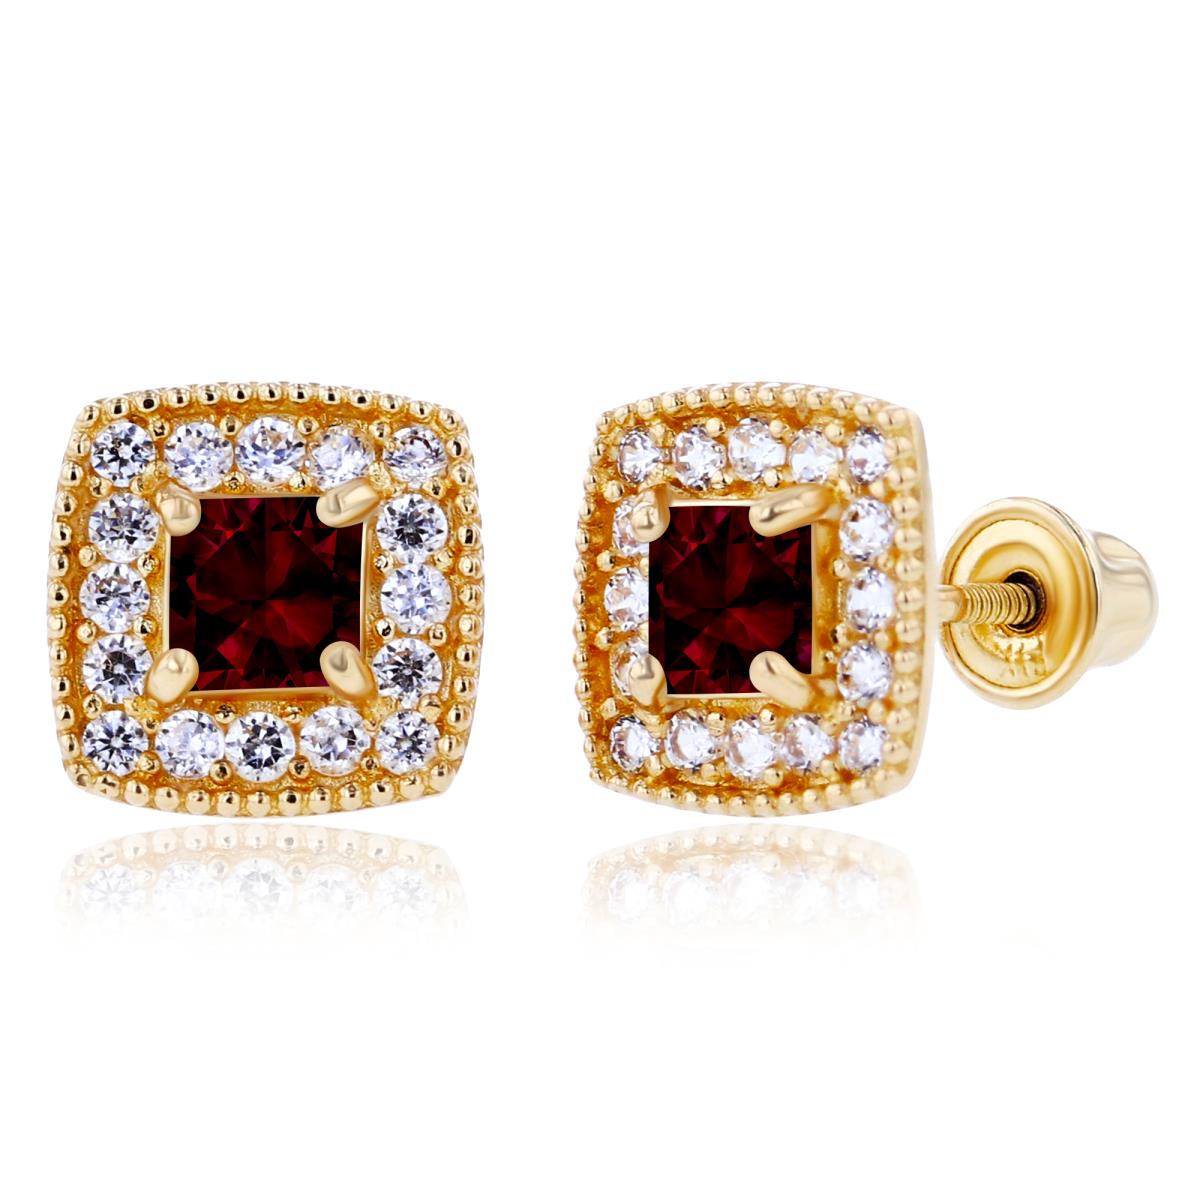 Sterling Silver Yellow 3mm Square Garnet & 1mm Created White Sapphire Cushion Halo Screwback Earrings